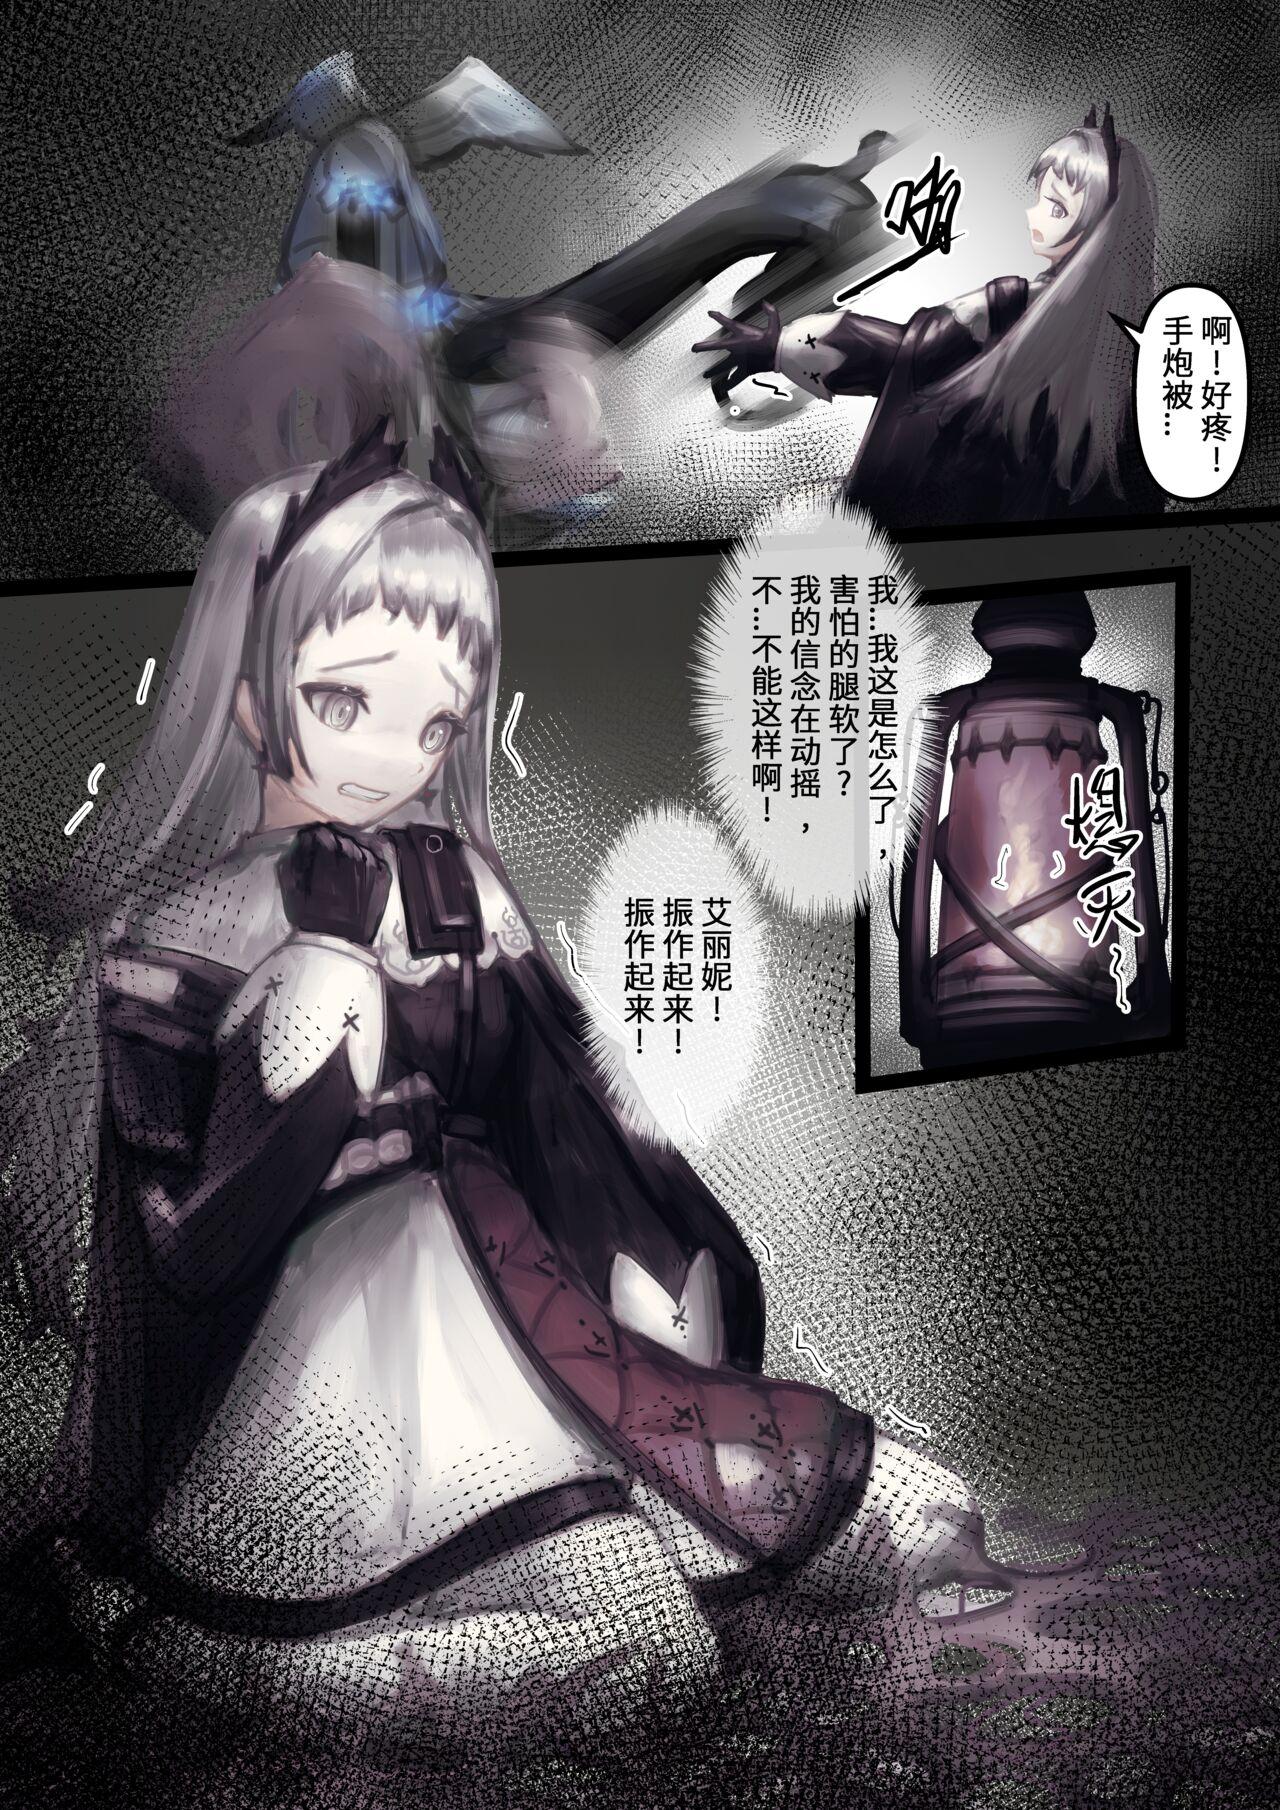 India Darkinghts艾丽妮的末路 - Arknights Juggs - Page 4